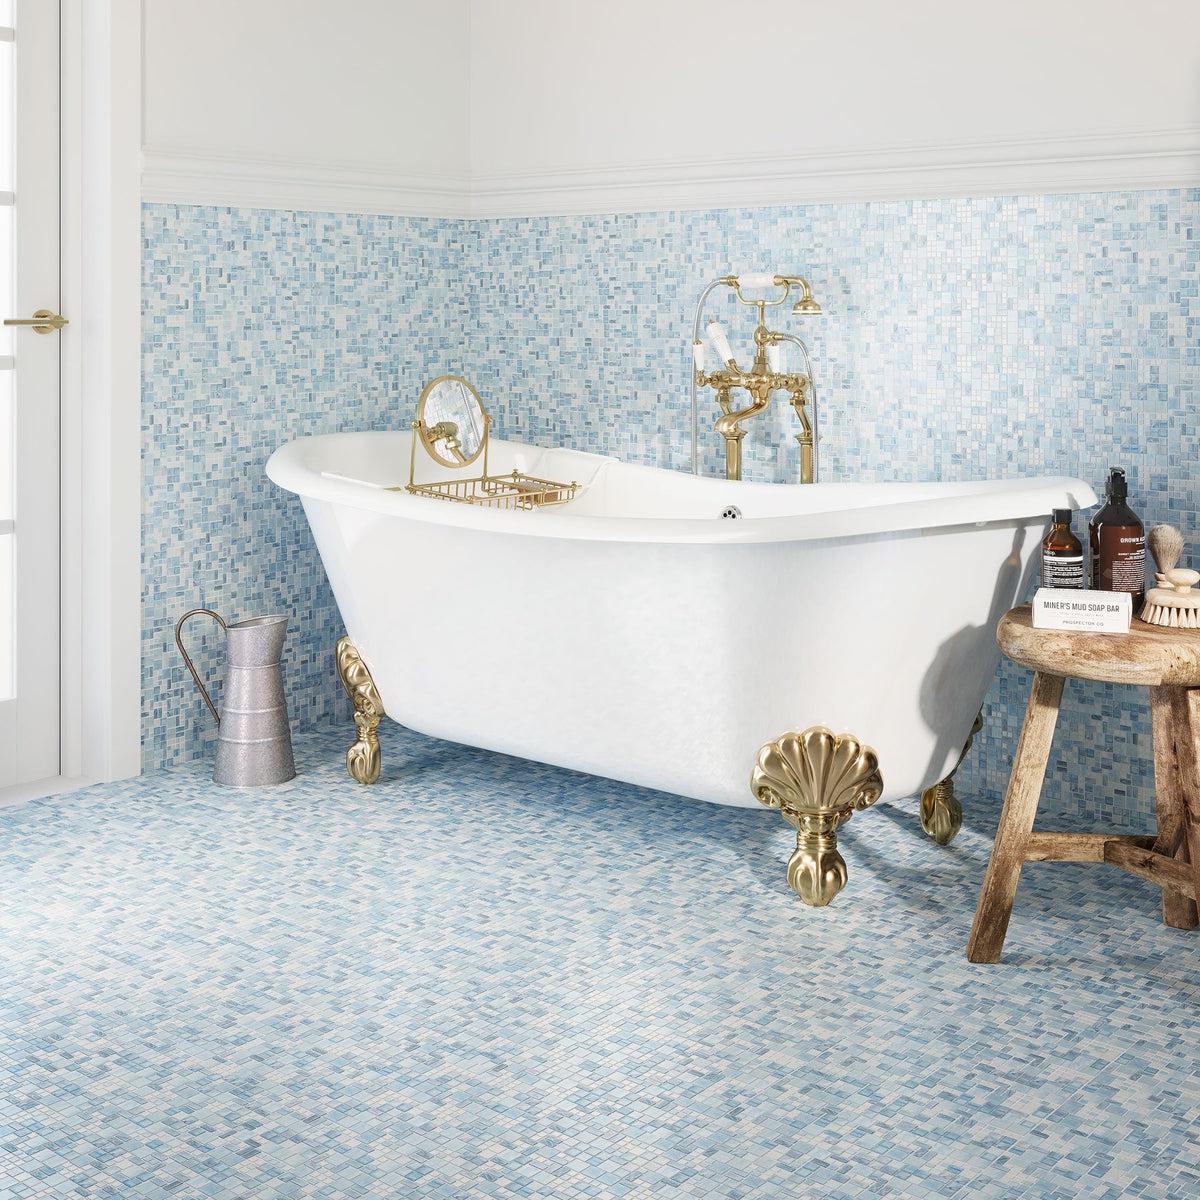 White and Gold Classic Style Bathtub in Blue Mini Versailles Glass Mosaic Tile Interior